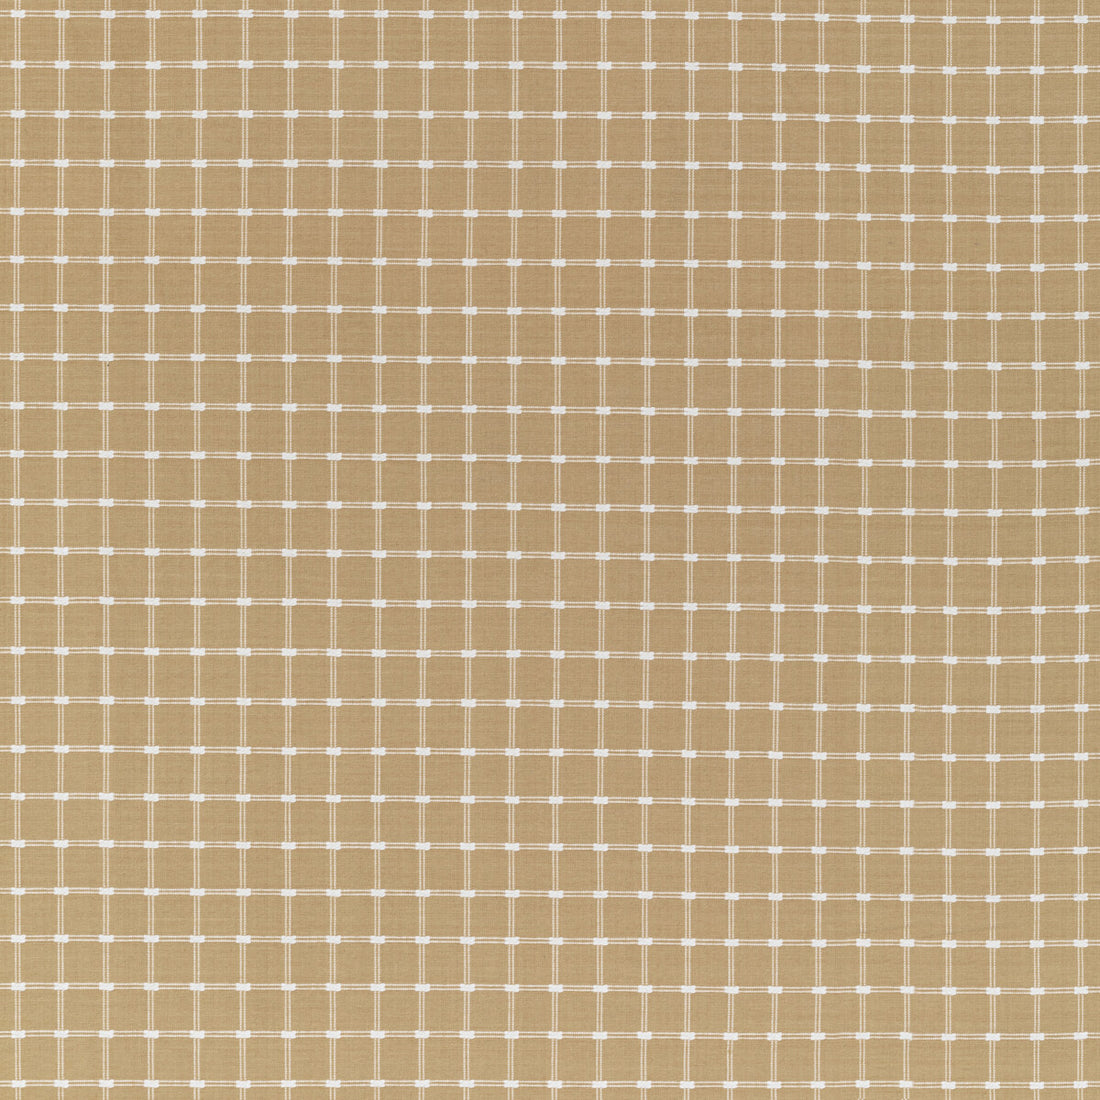 Lison Check fabric in beige color - pattern 8022116.16.0 - by Brunschwig &amp; Fils in the Normant Checks And Stripes II collection